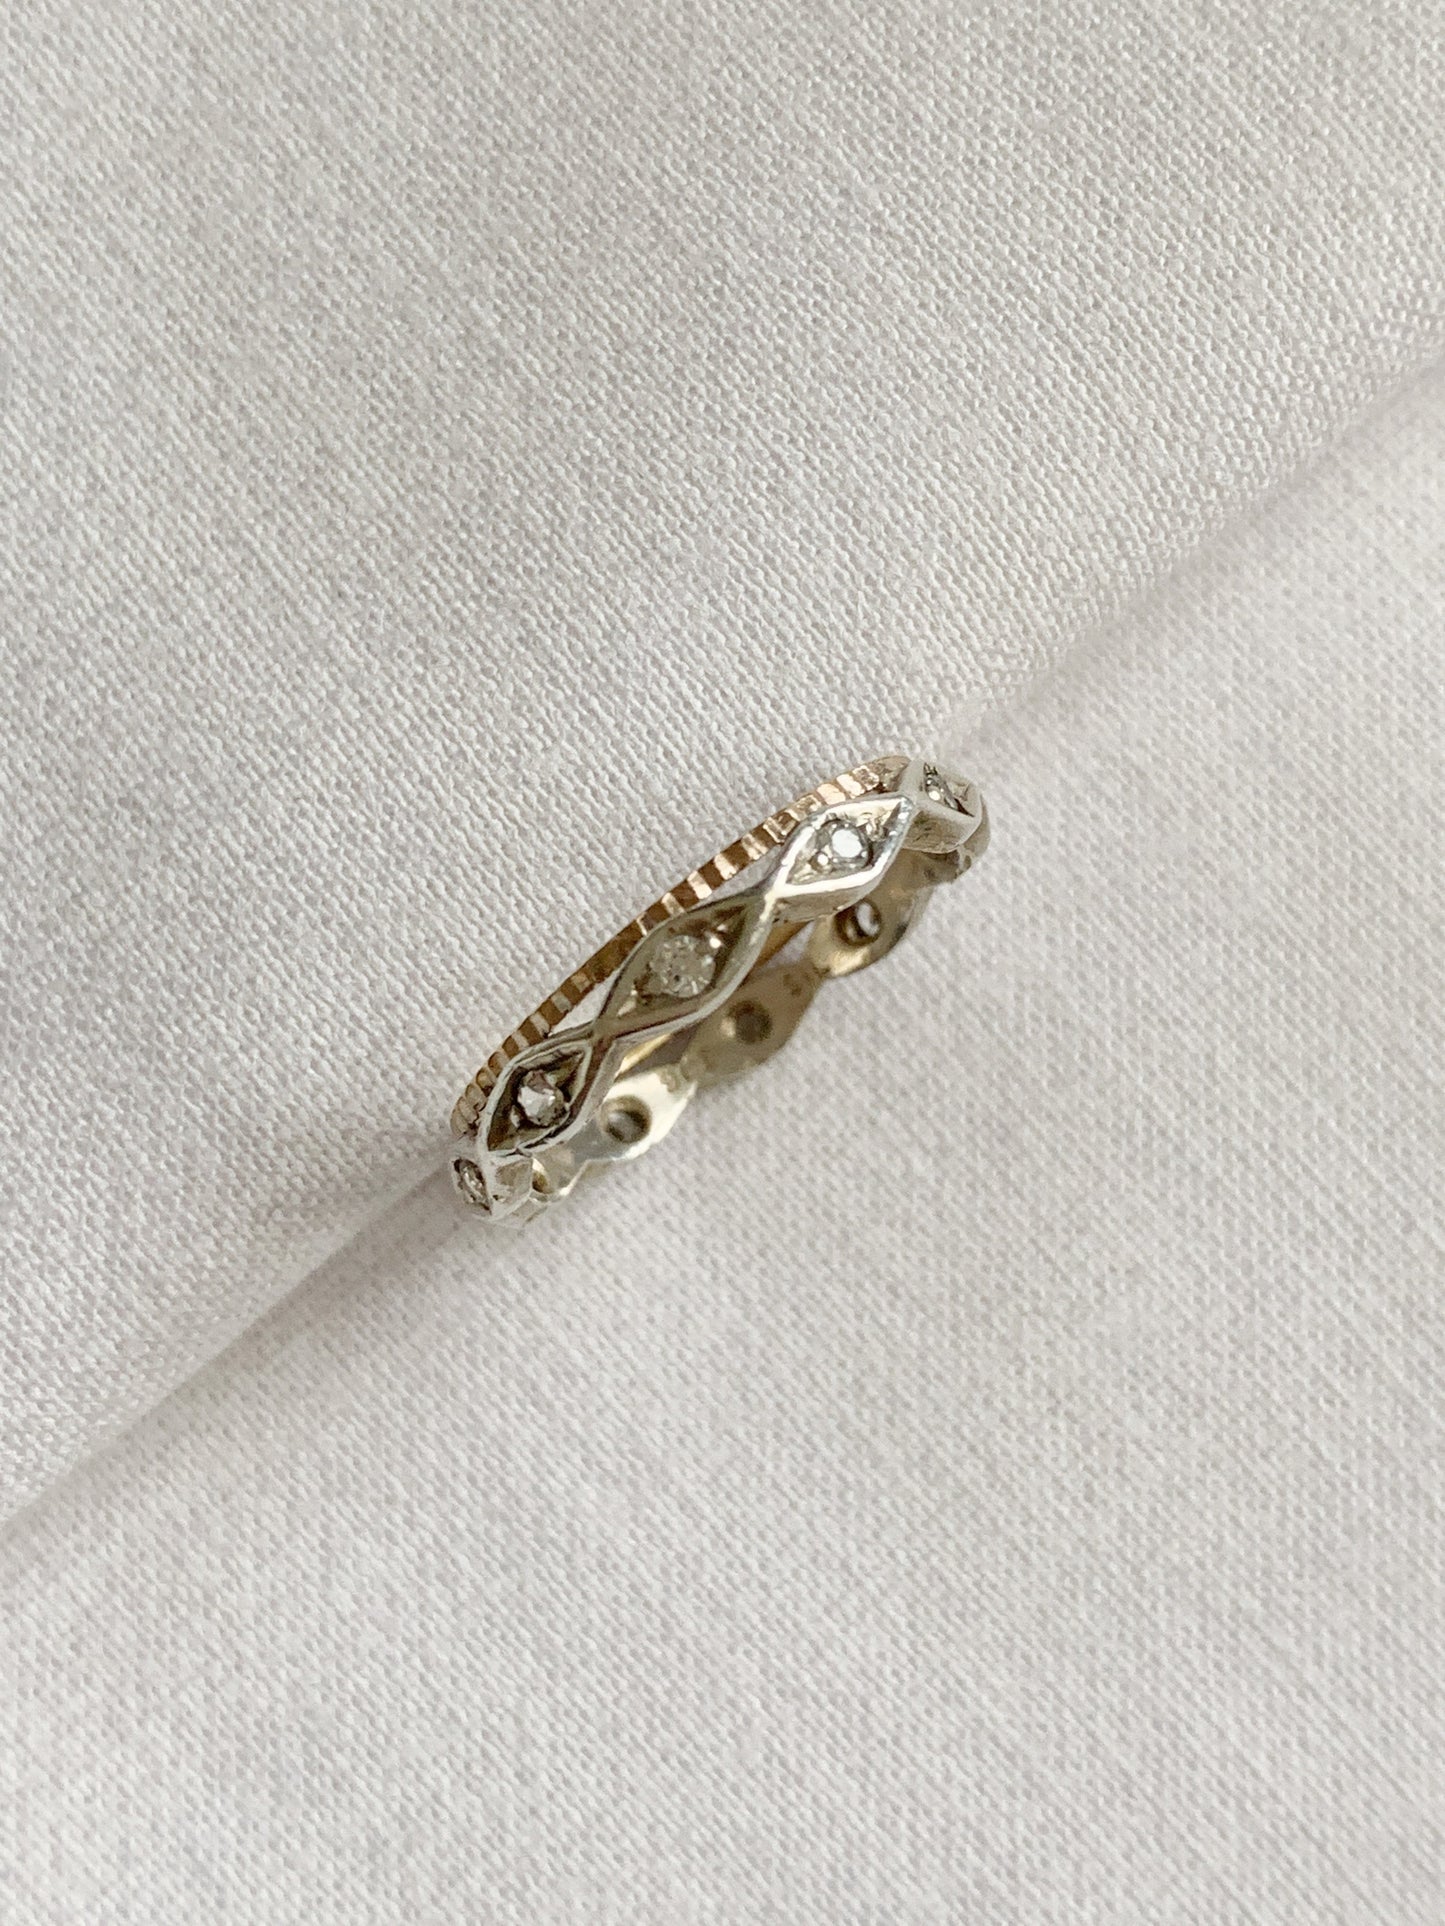 Vintage 9ct Gold and Sterling Silver Eternity Ring